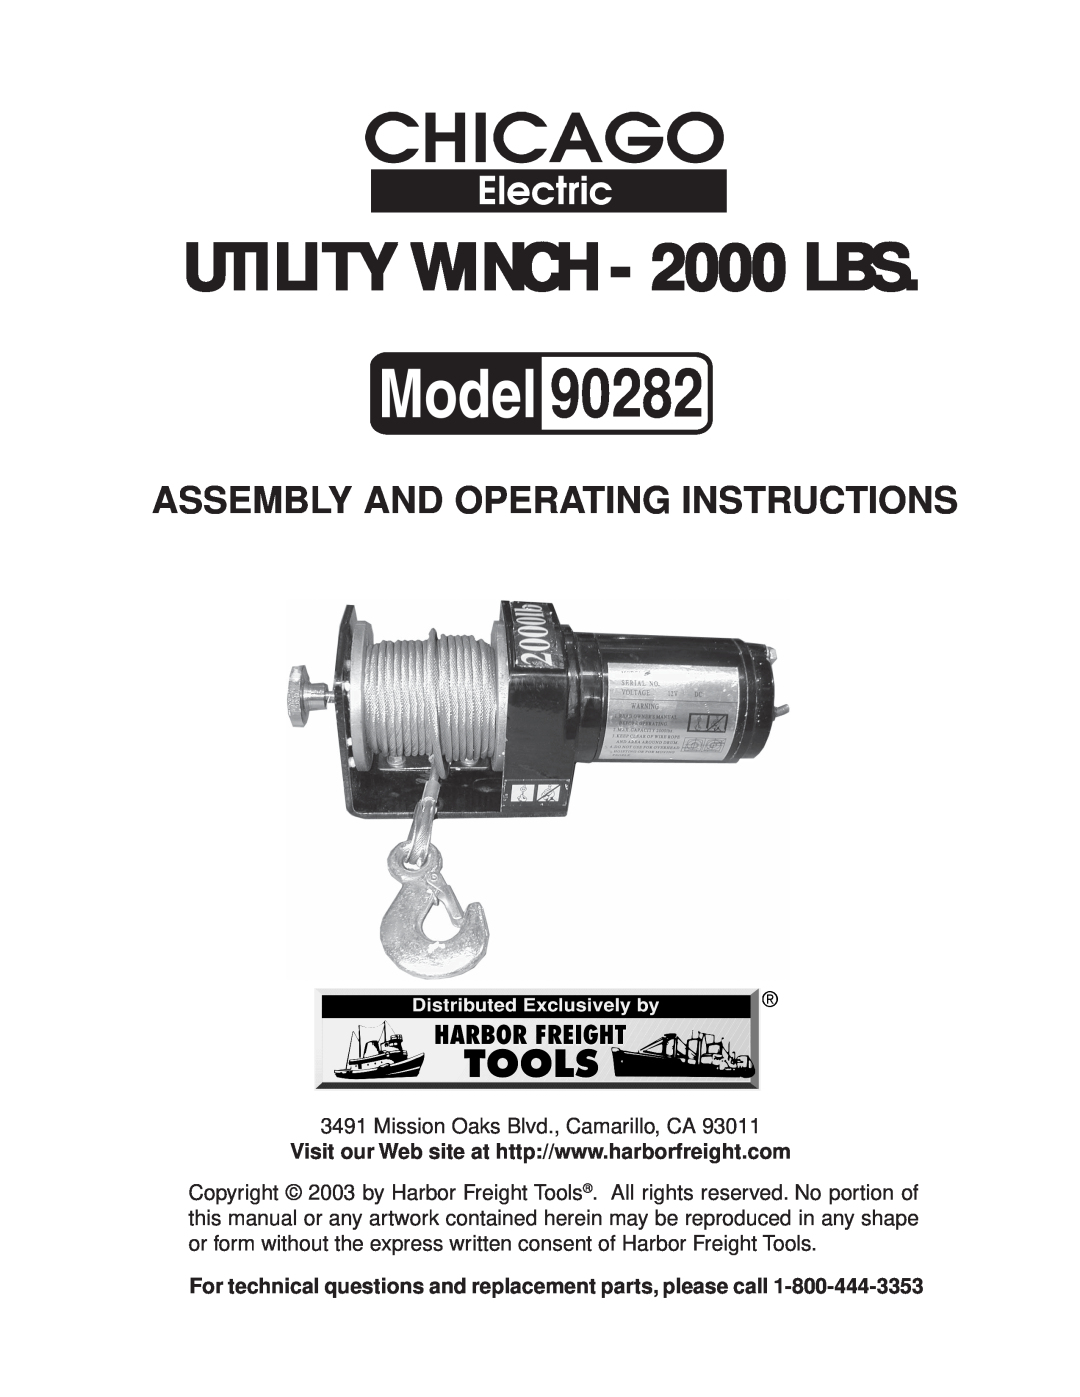 Chicago Electric 90282 manual UTILITY WINCH - 2000 LBS, Assembly And Operating Instructions 